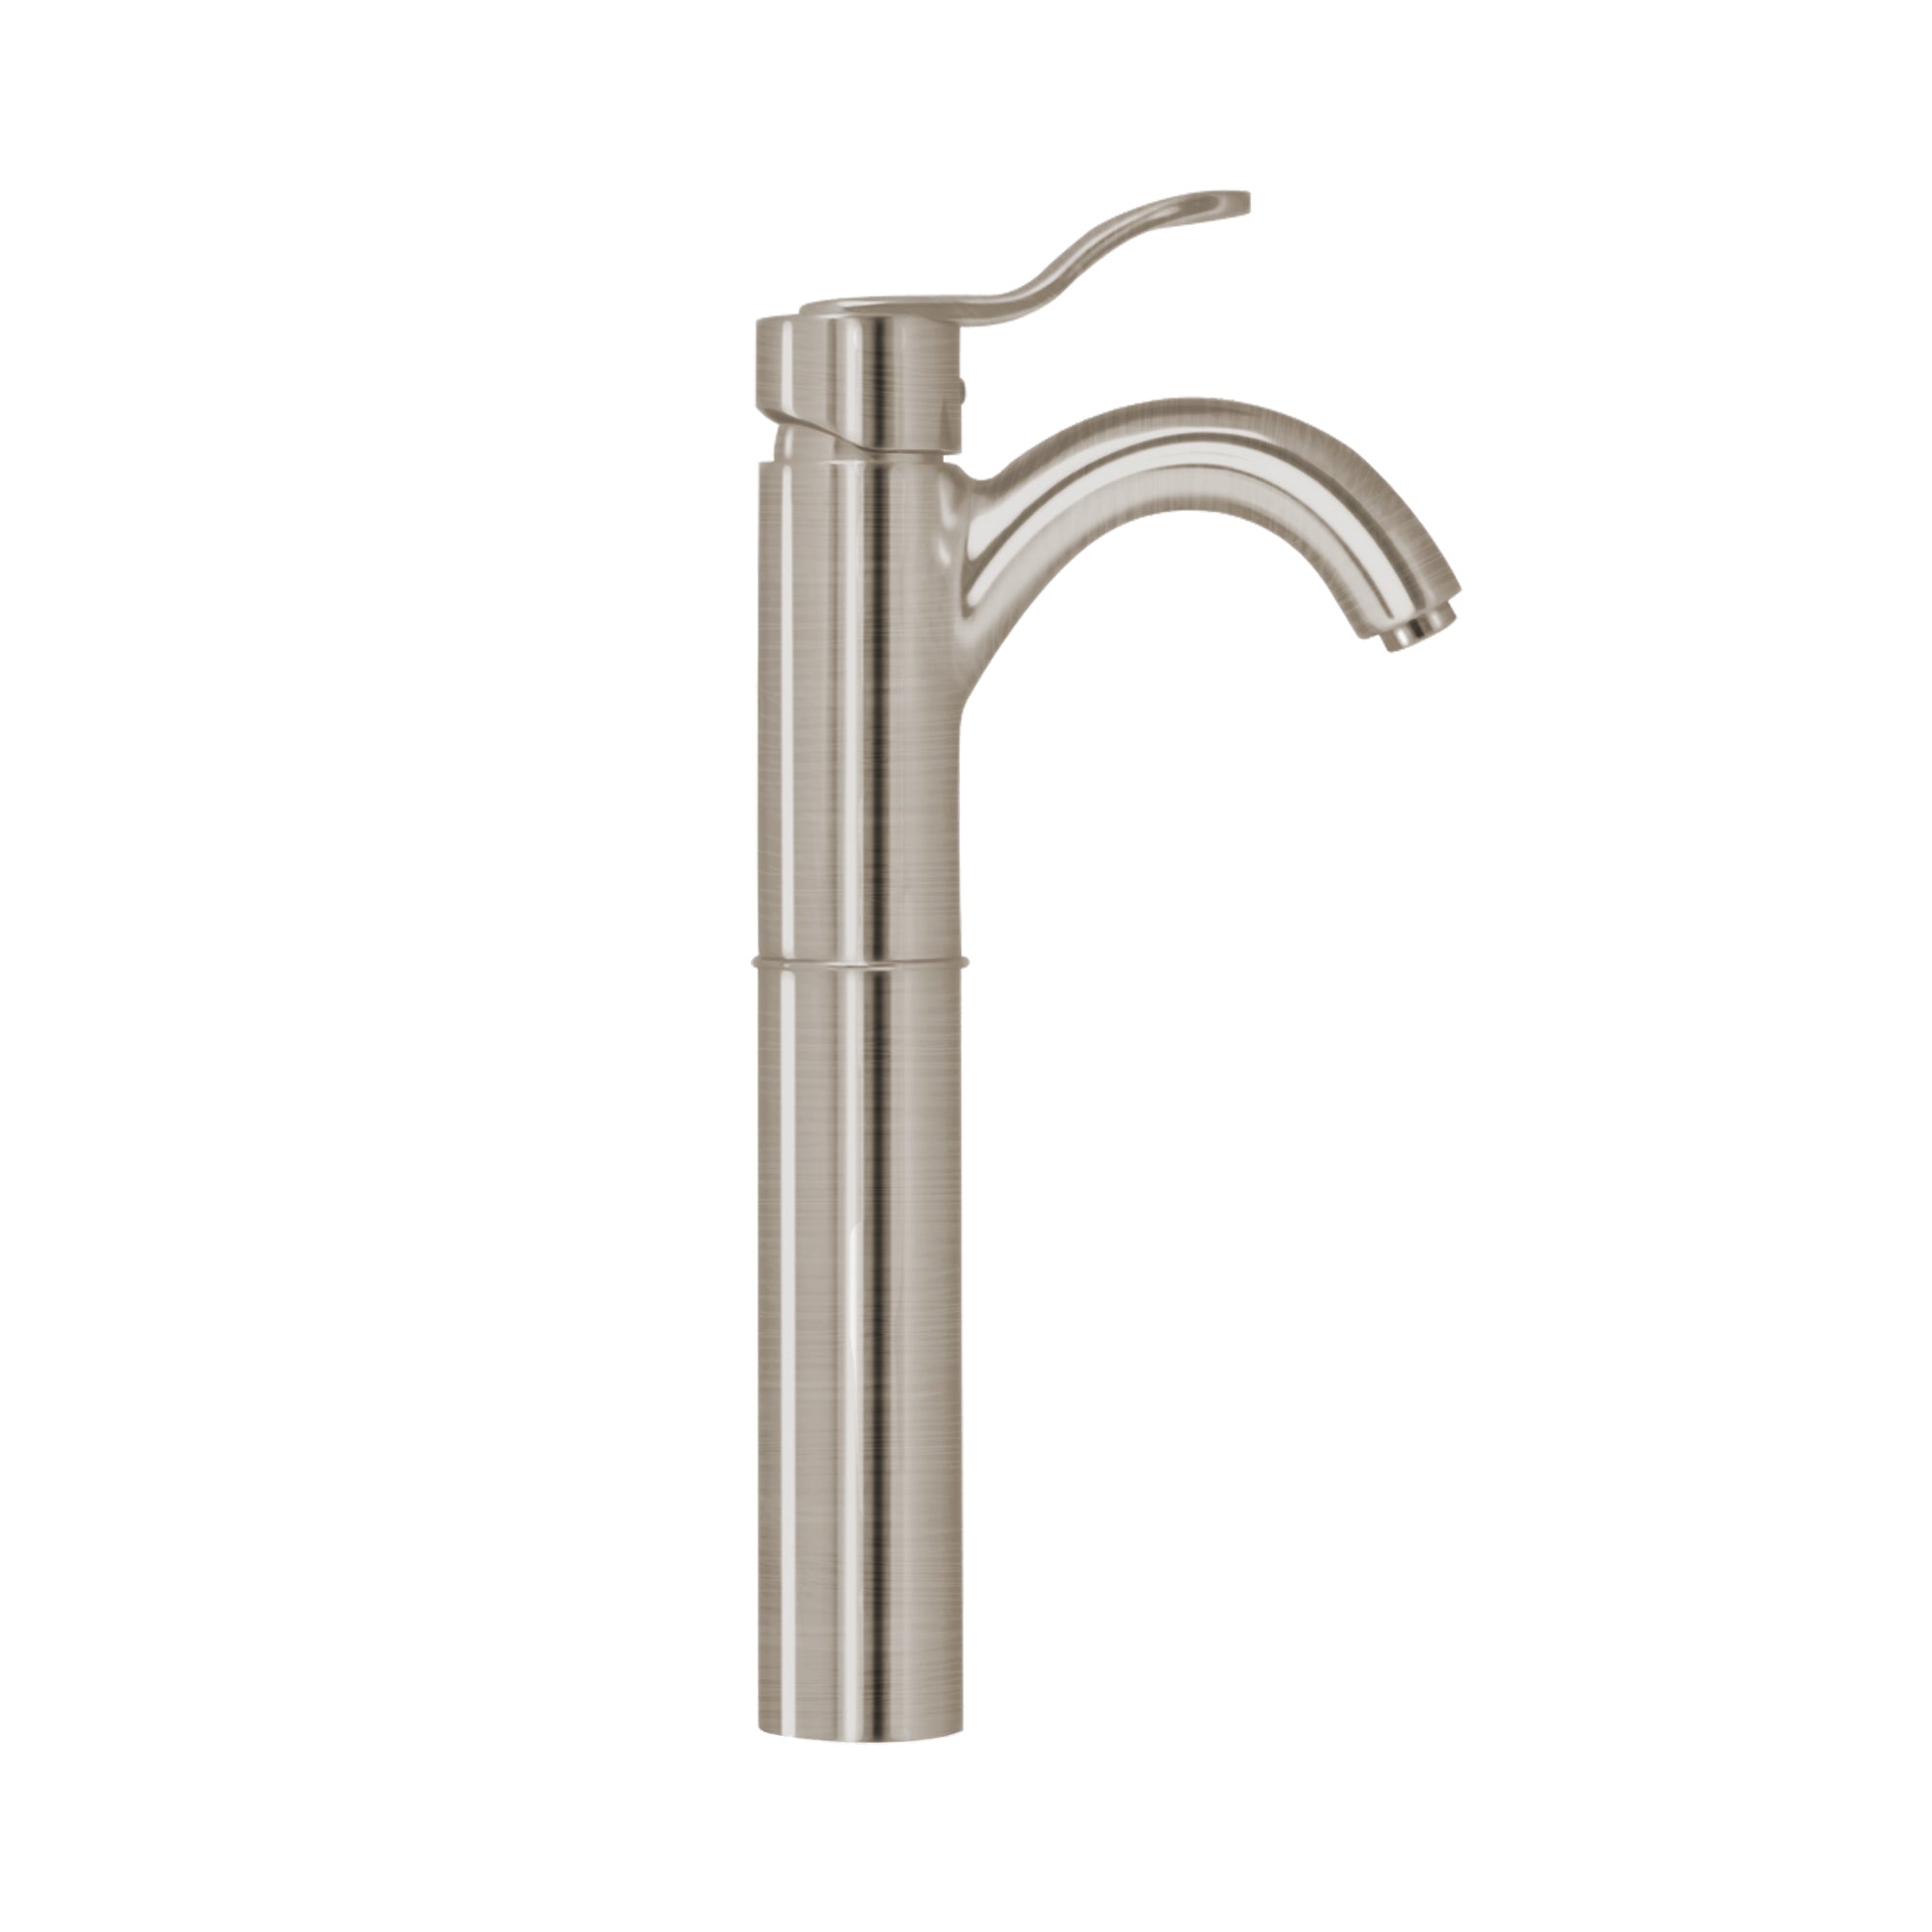 Whitehaus Galleryhaus Elevated Single Hole/Single Lever Lavatory Faucet 3-04045 - Vital Hydrotherapy